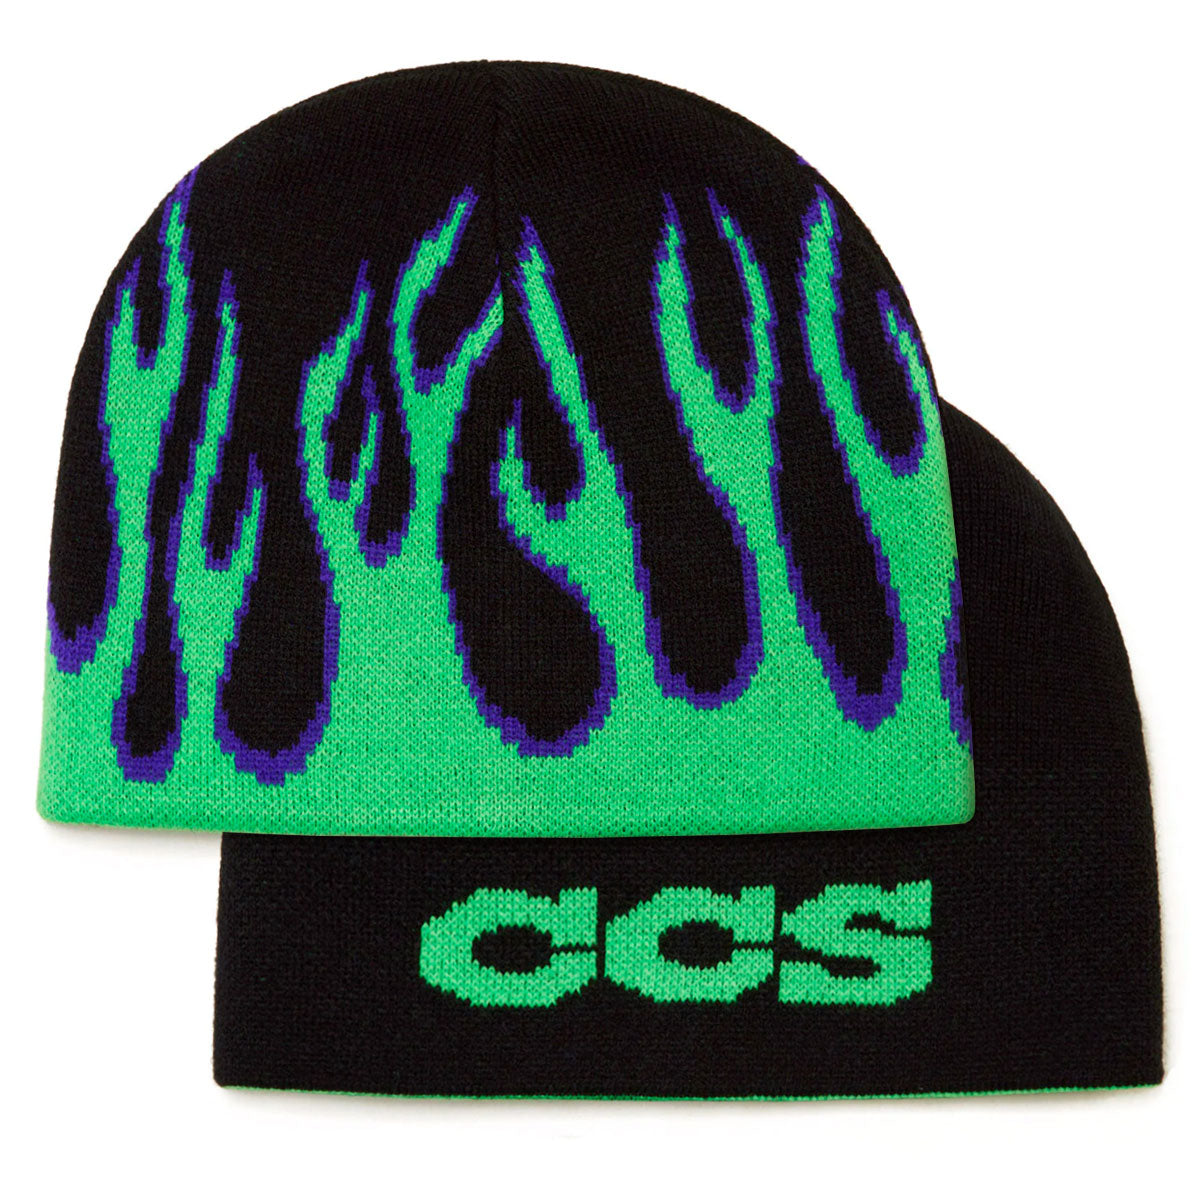 CCS Flames Reversible Skully Beanie - Black/Green image 1